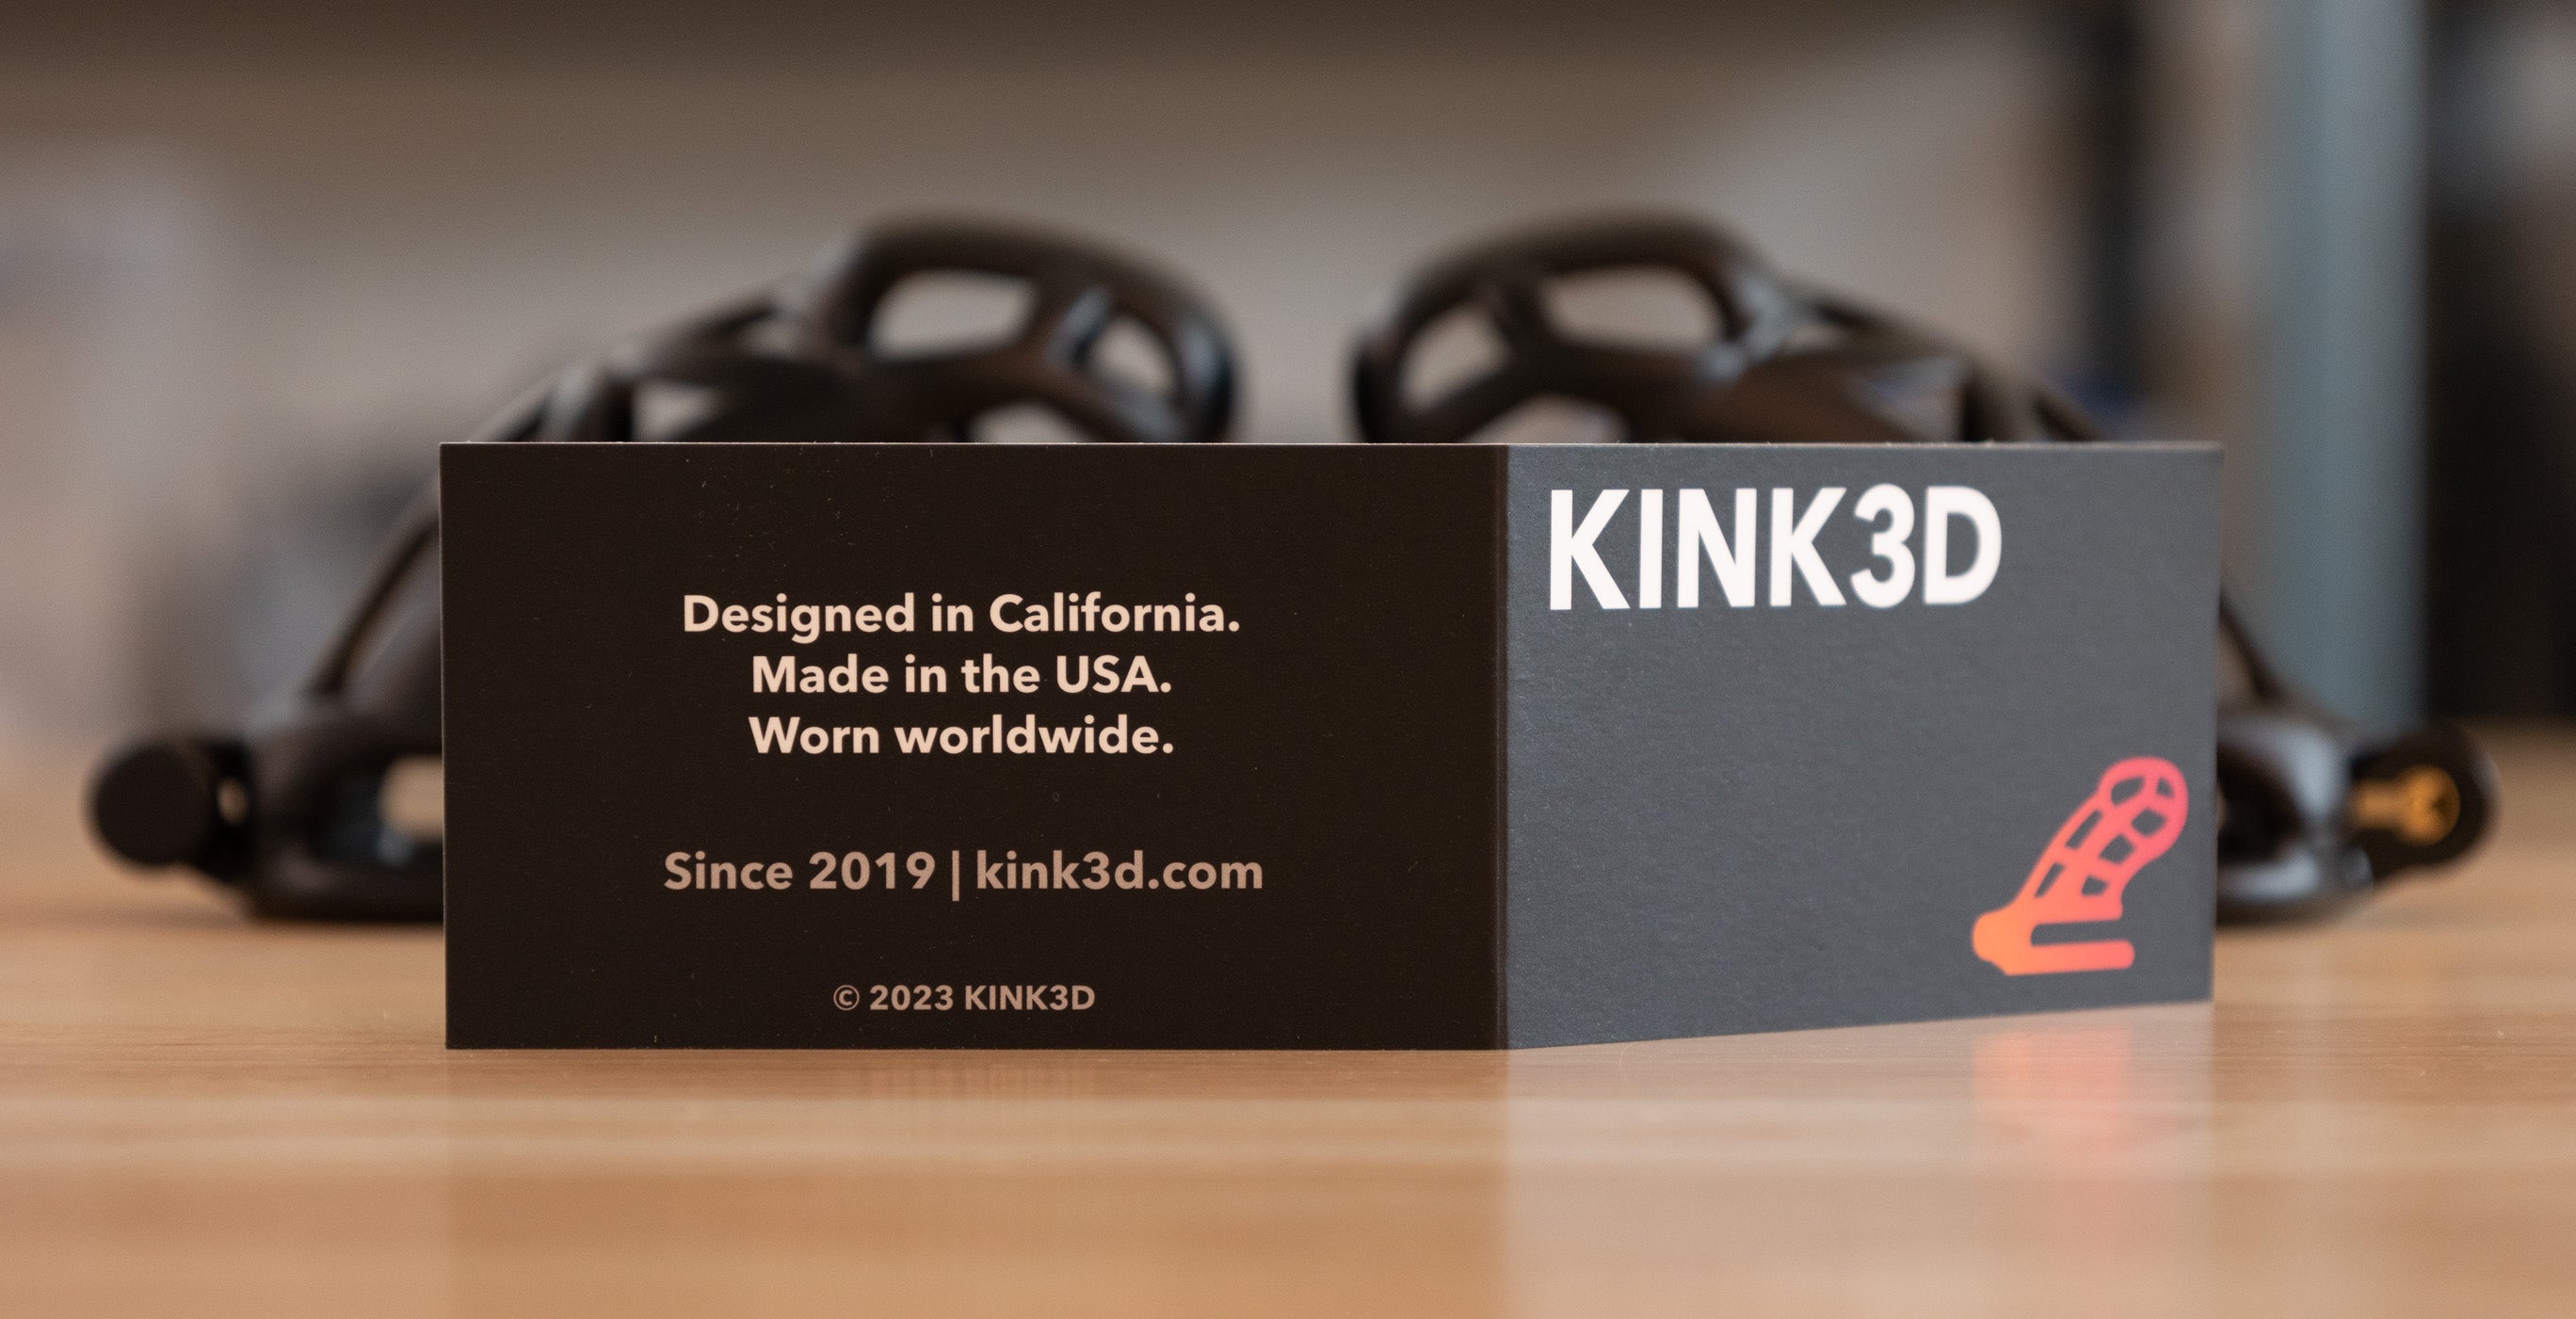 KINK3D Cobra product insert card with chastity cages in background